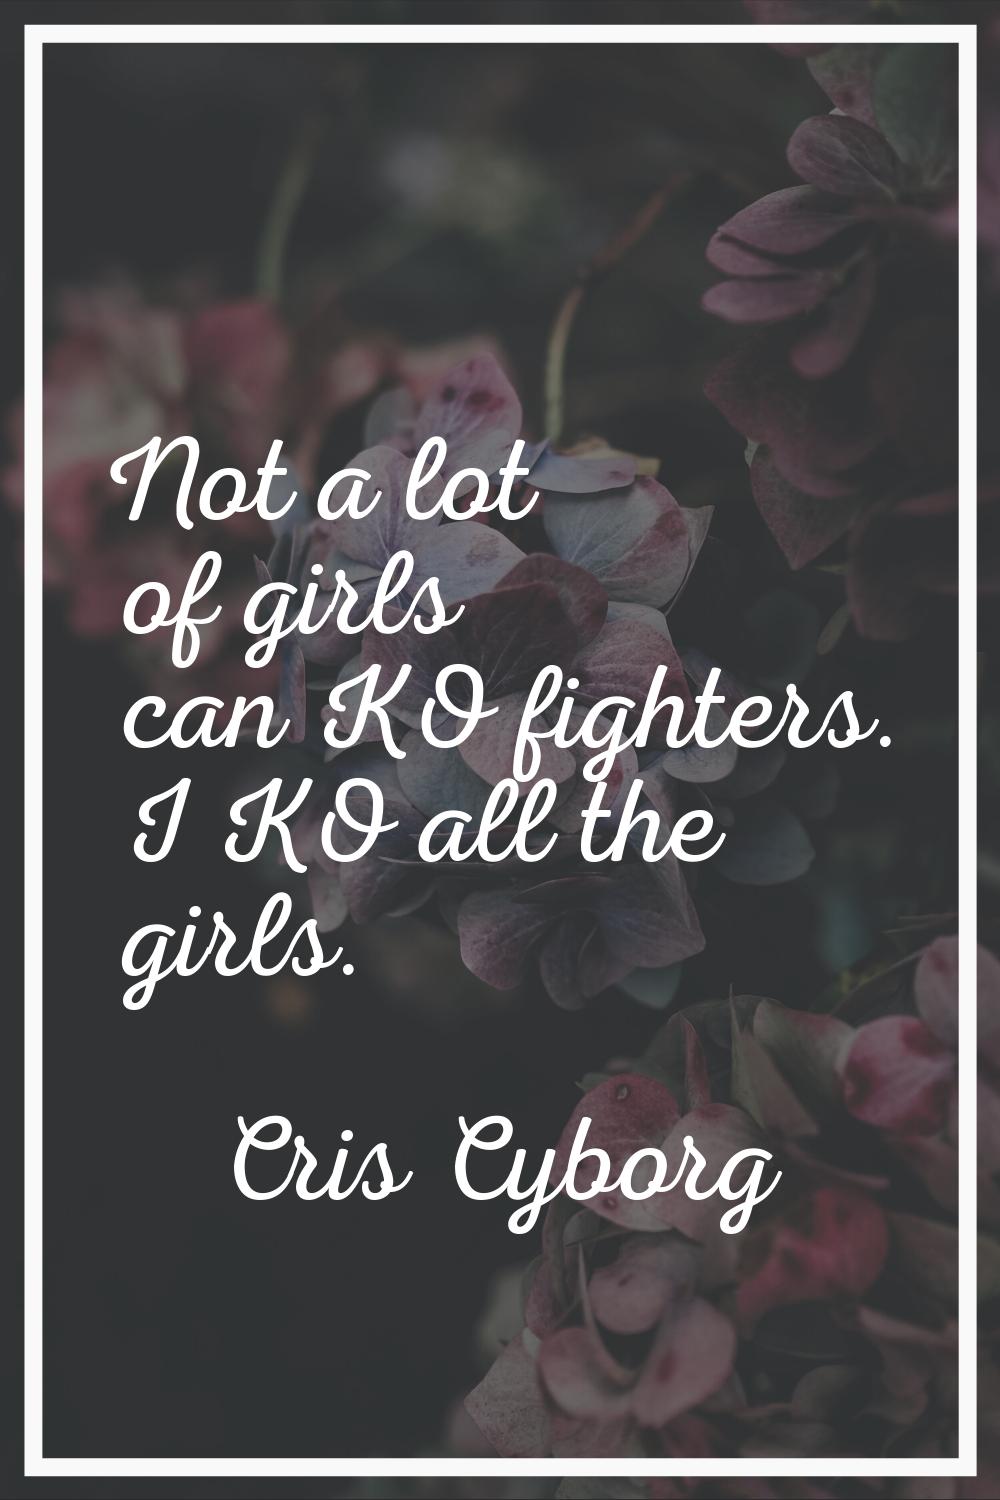 Not a lot of girls can KO fighters. I KO all the girls.